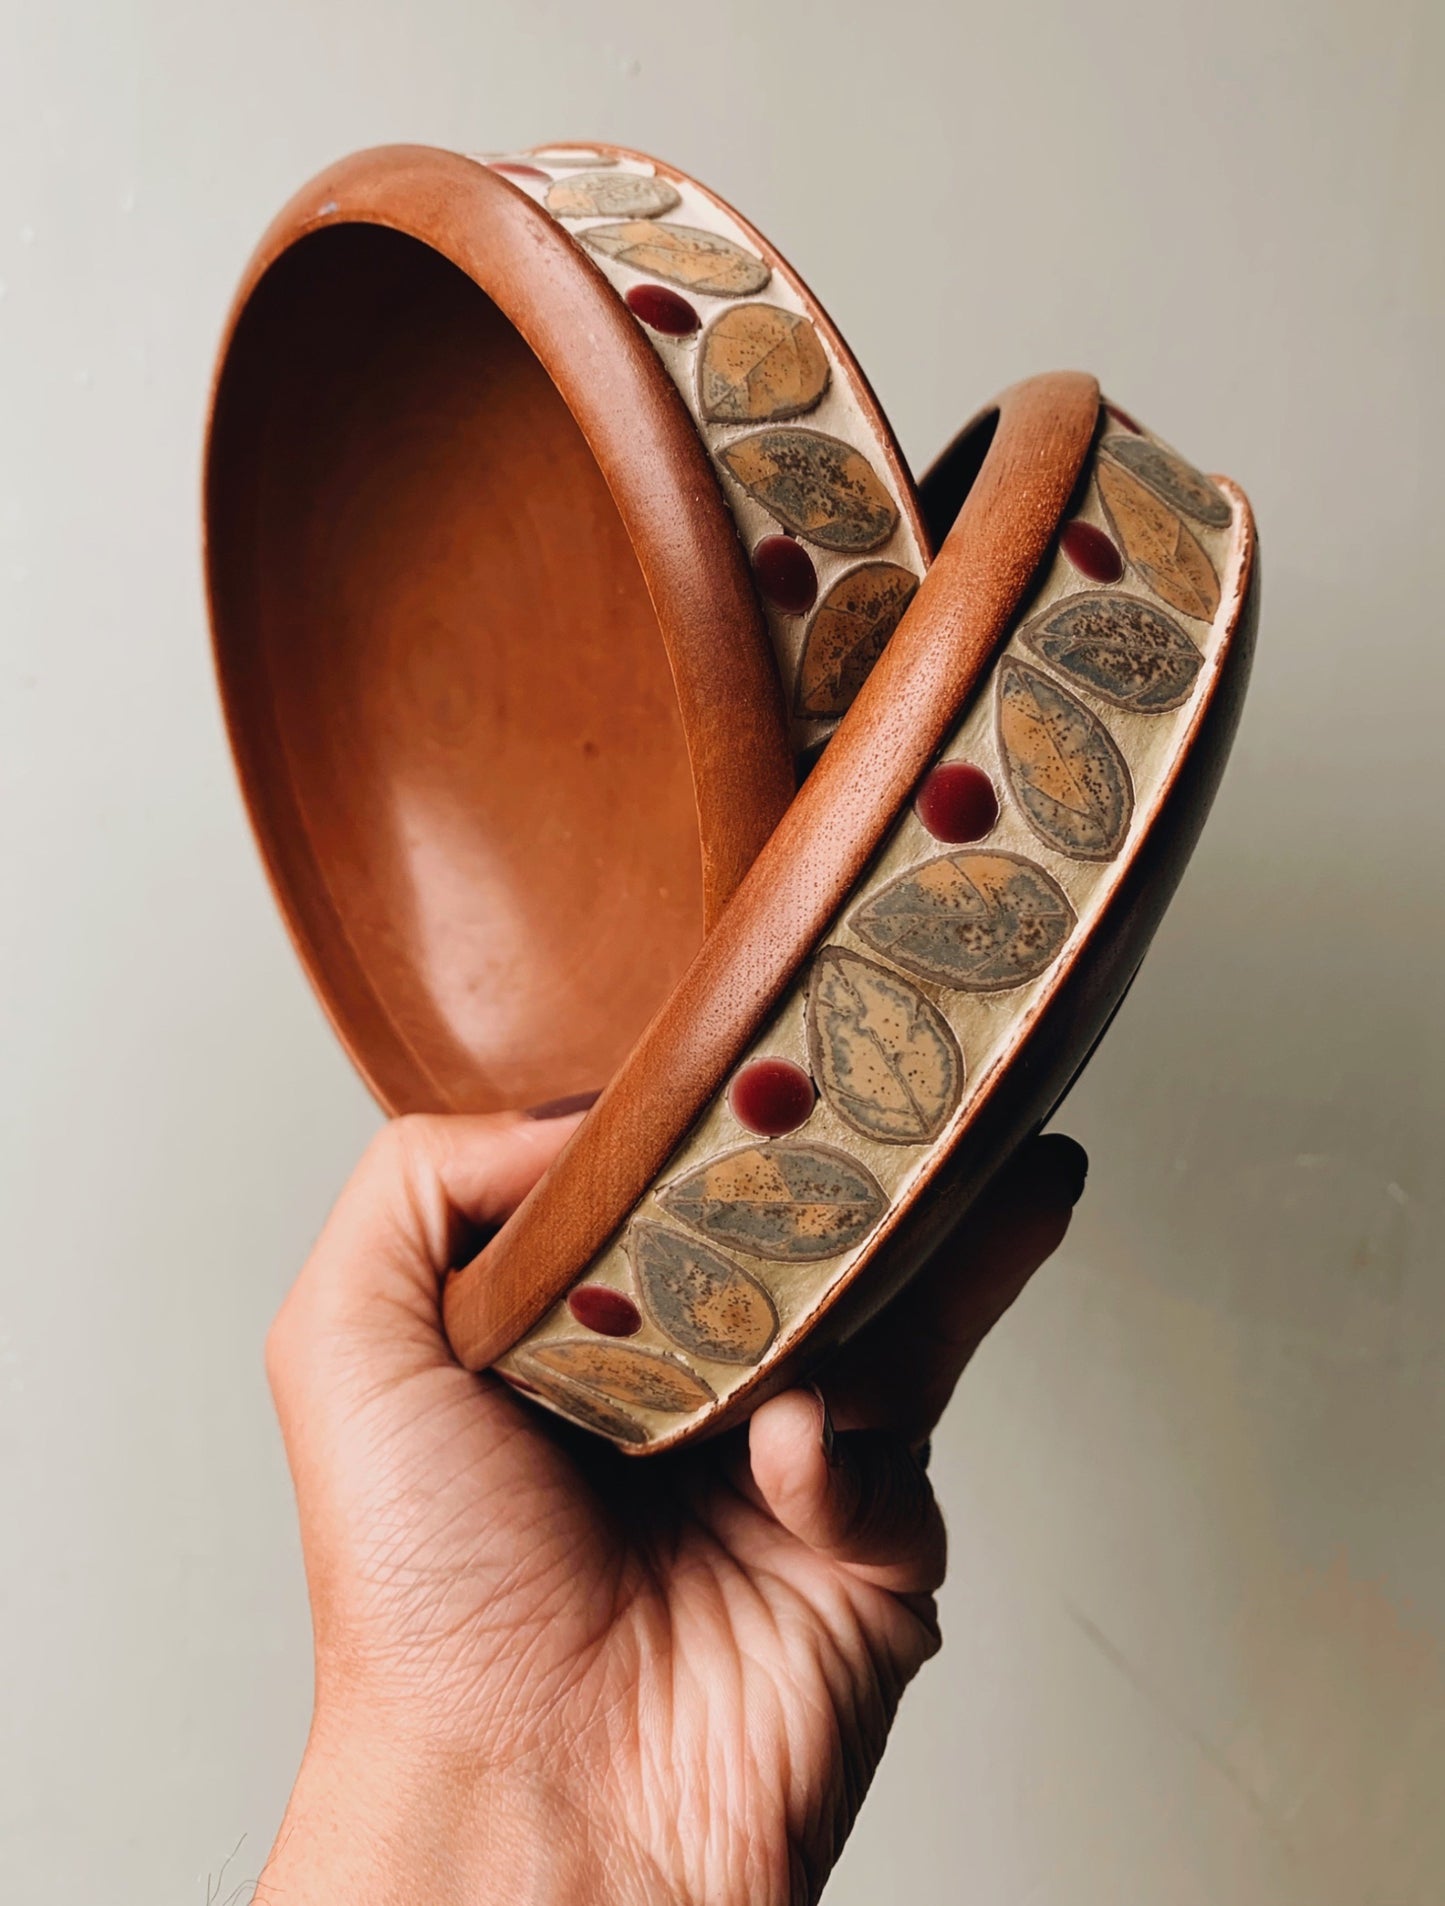 Rustic Decorative Wooden bowls (four available / sold separately)